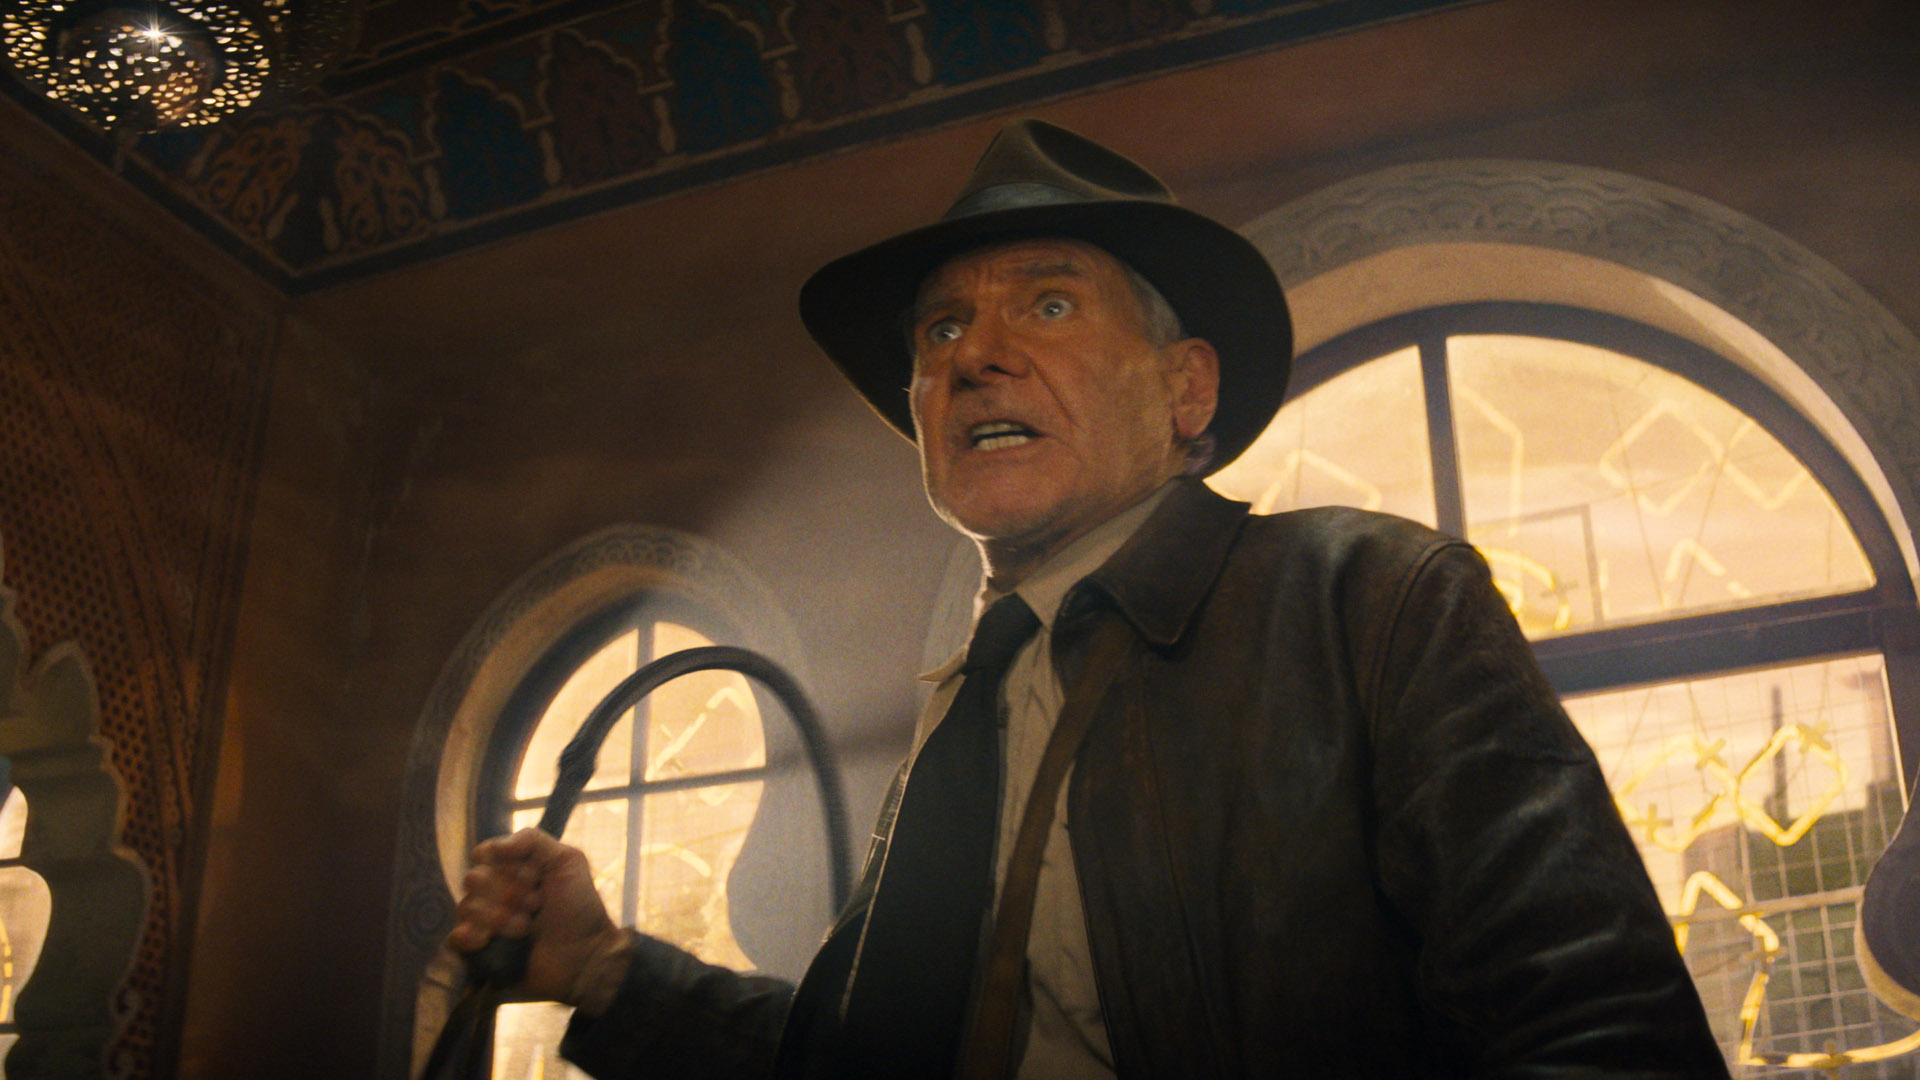 Indiana Jones 5 Trailer Goes Back To The Series Roots – And I Couldnt